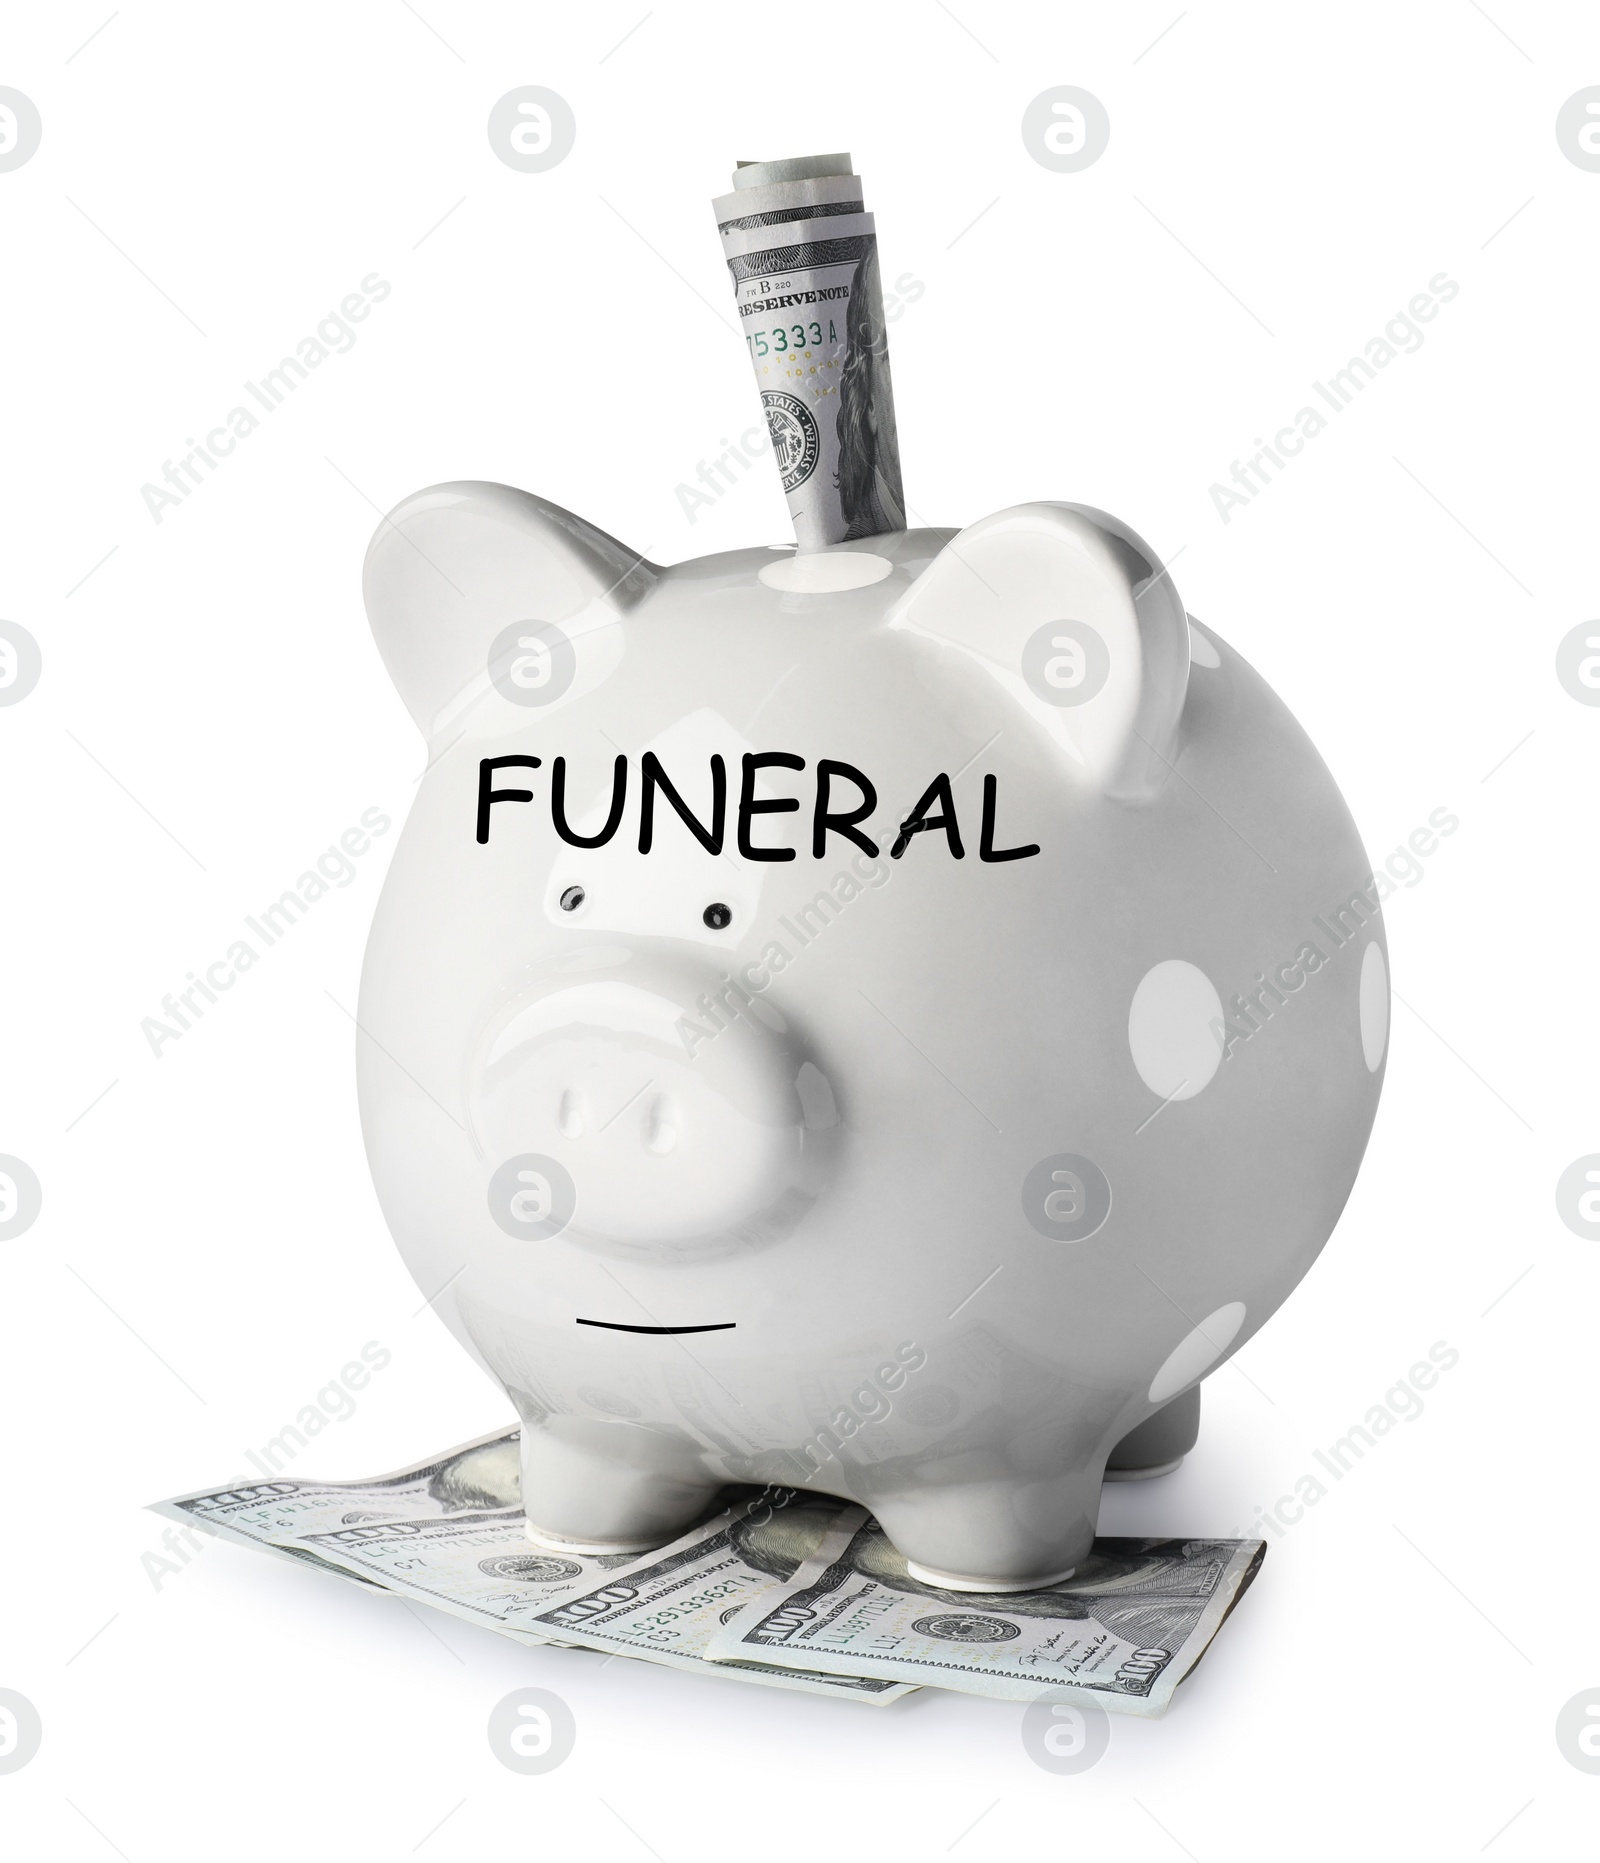 Image of Money for funeral expenses. Piggy bank with dollar banknotes on white background